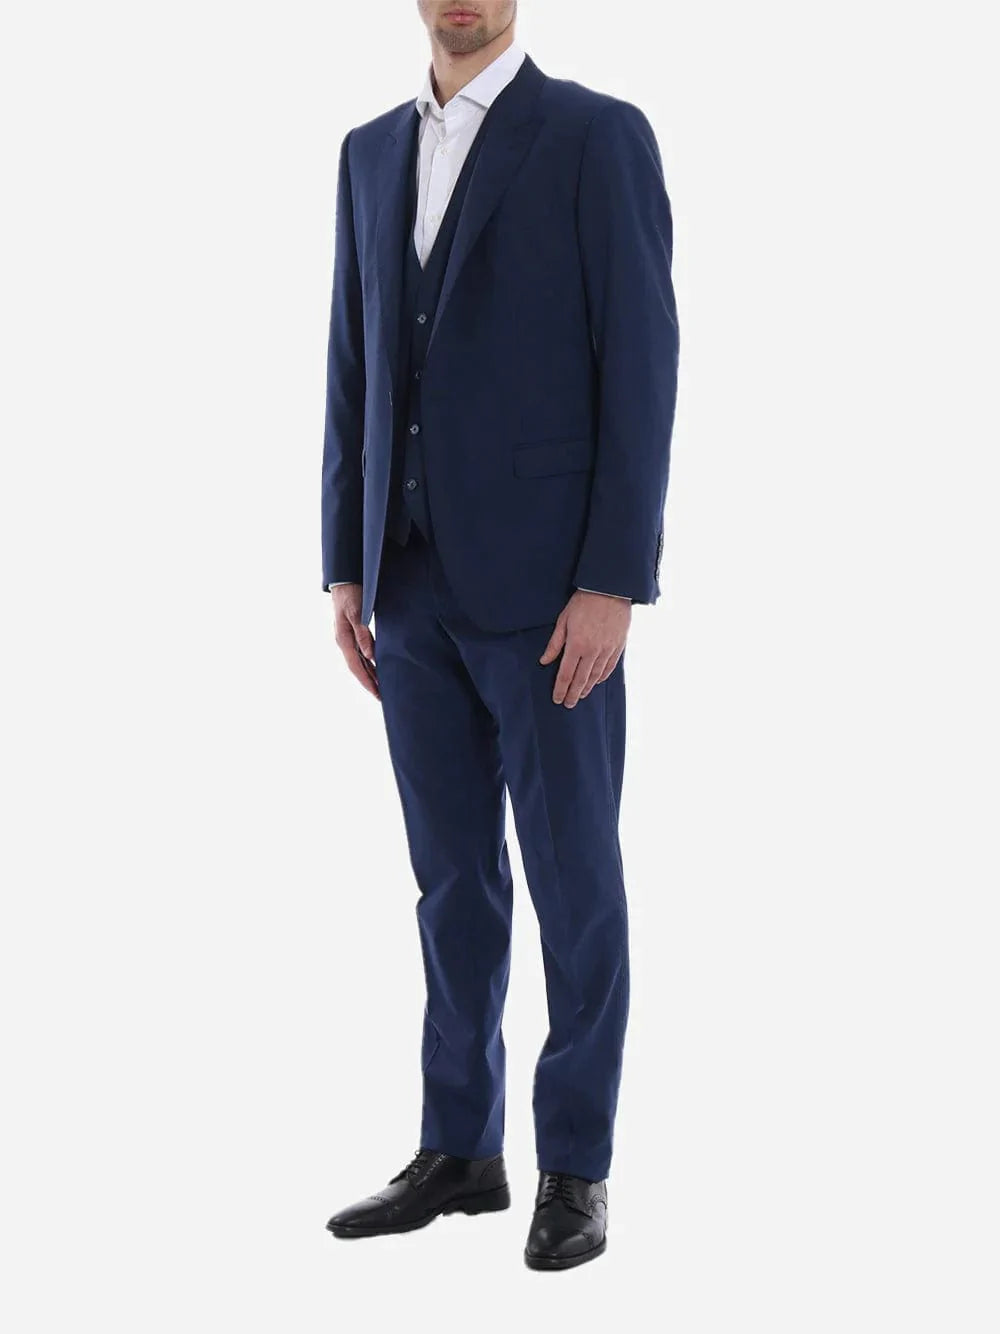 Dolce & Gabbana Wool Tailored Formal Suit